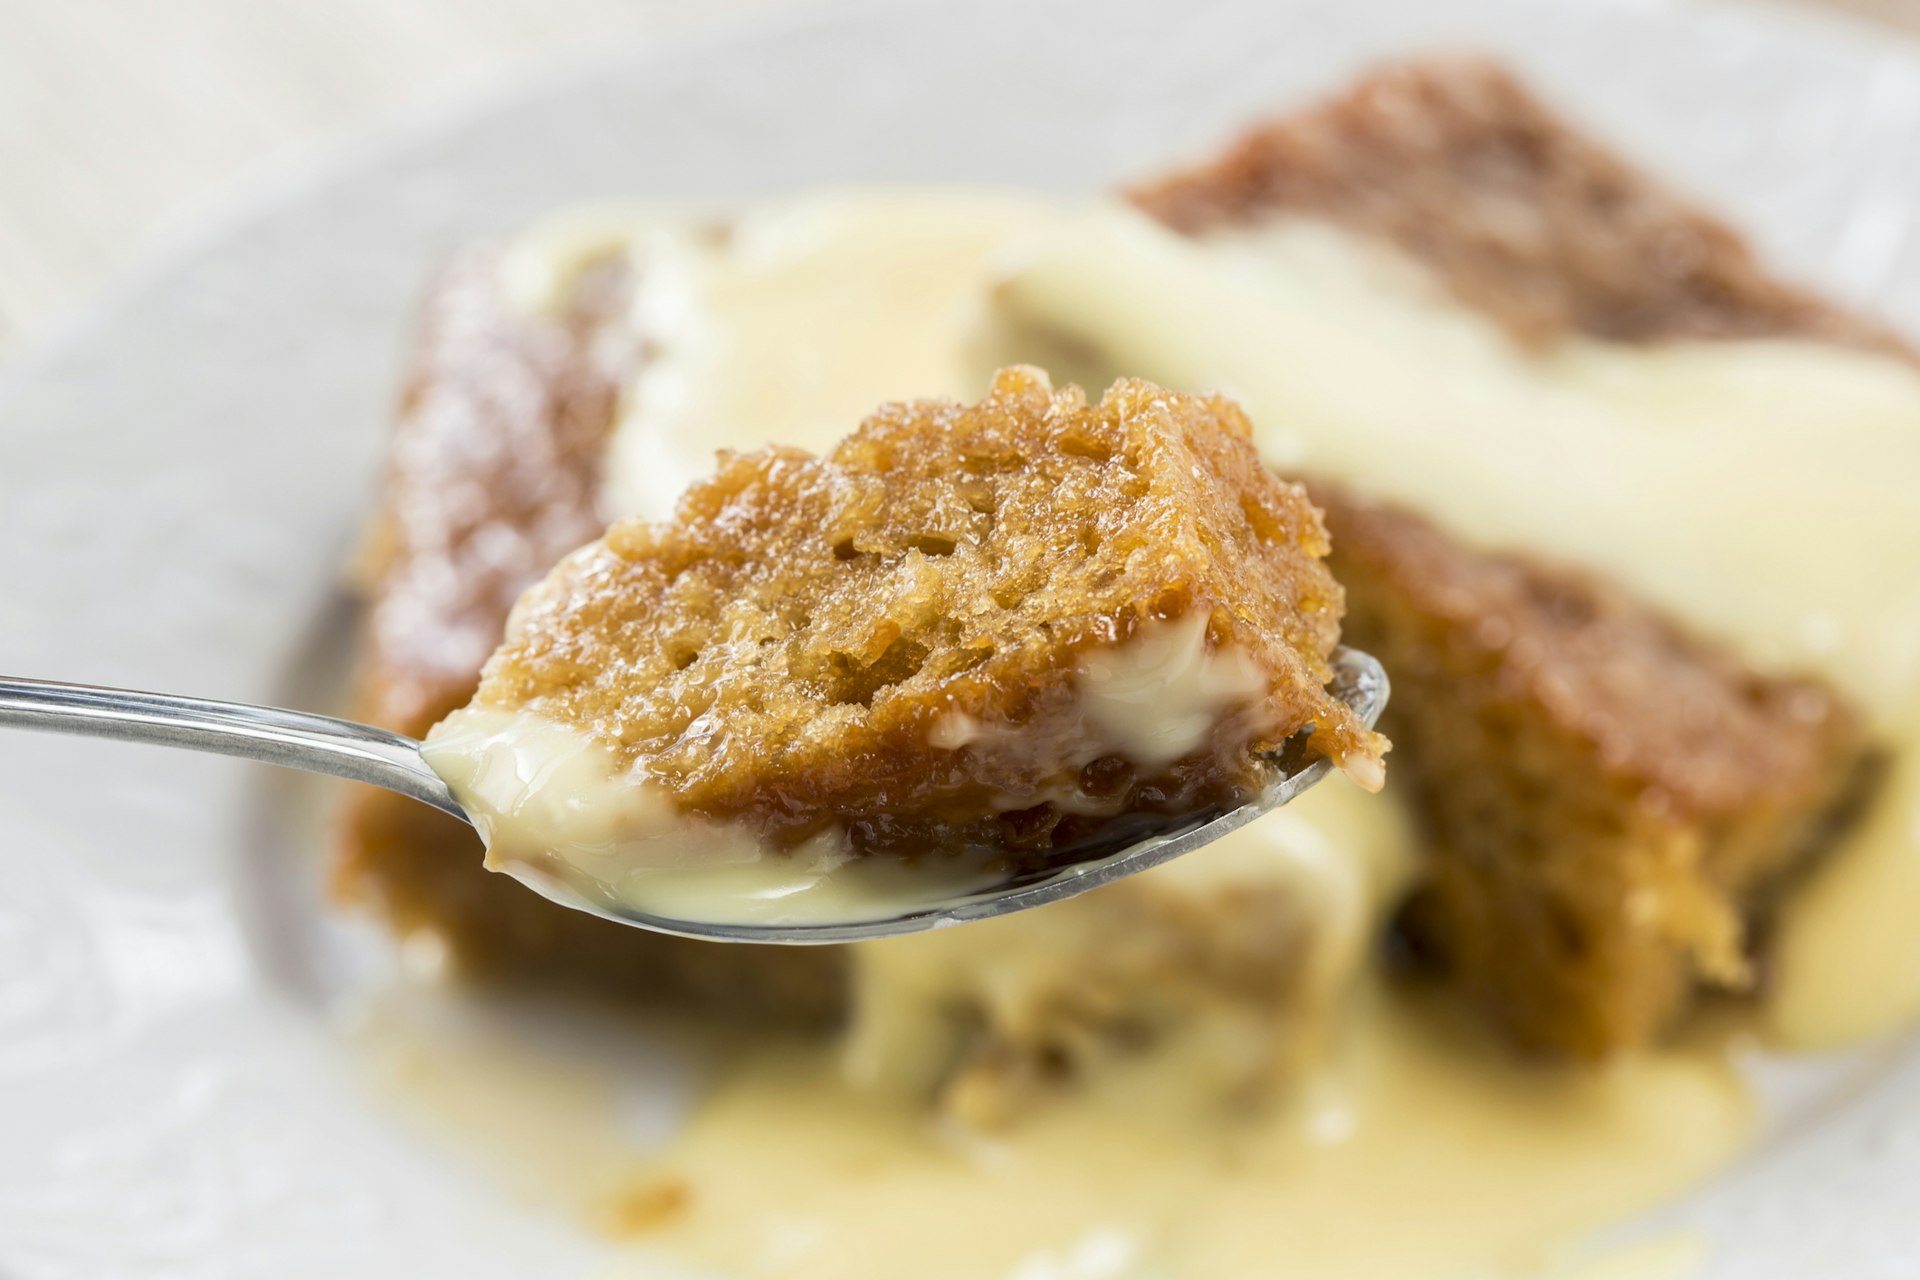 A spoonful of steaming malva pudding on a fork and caped in yellow custard